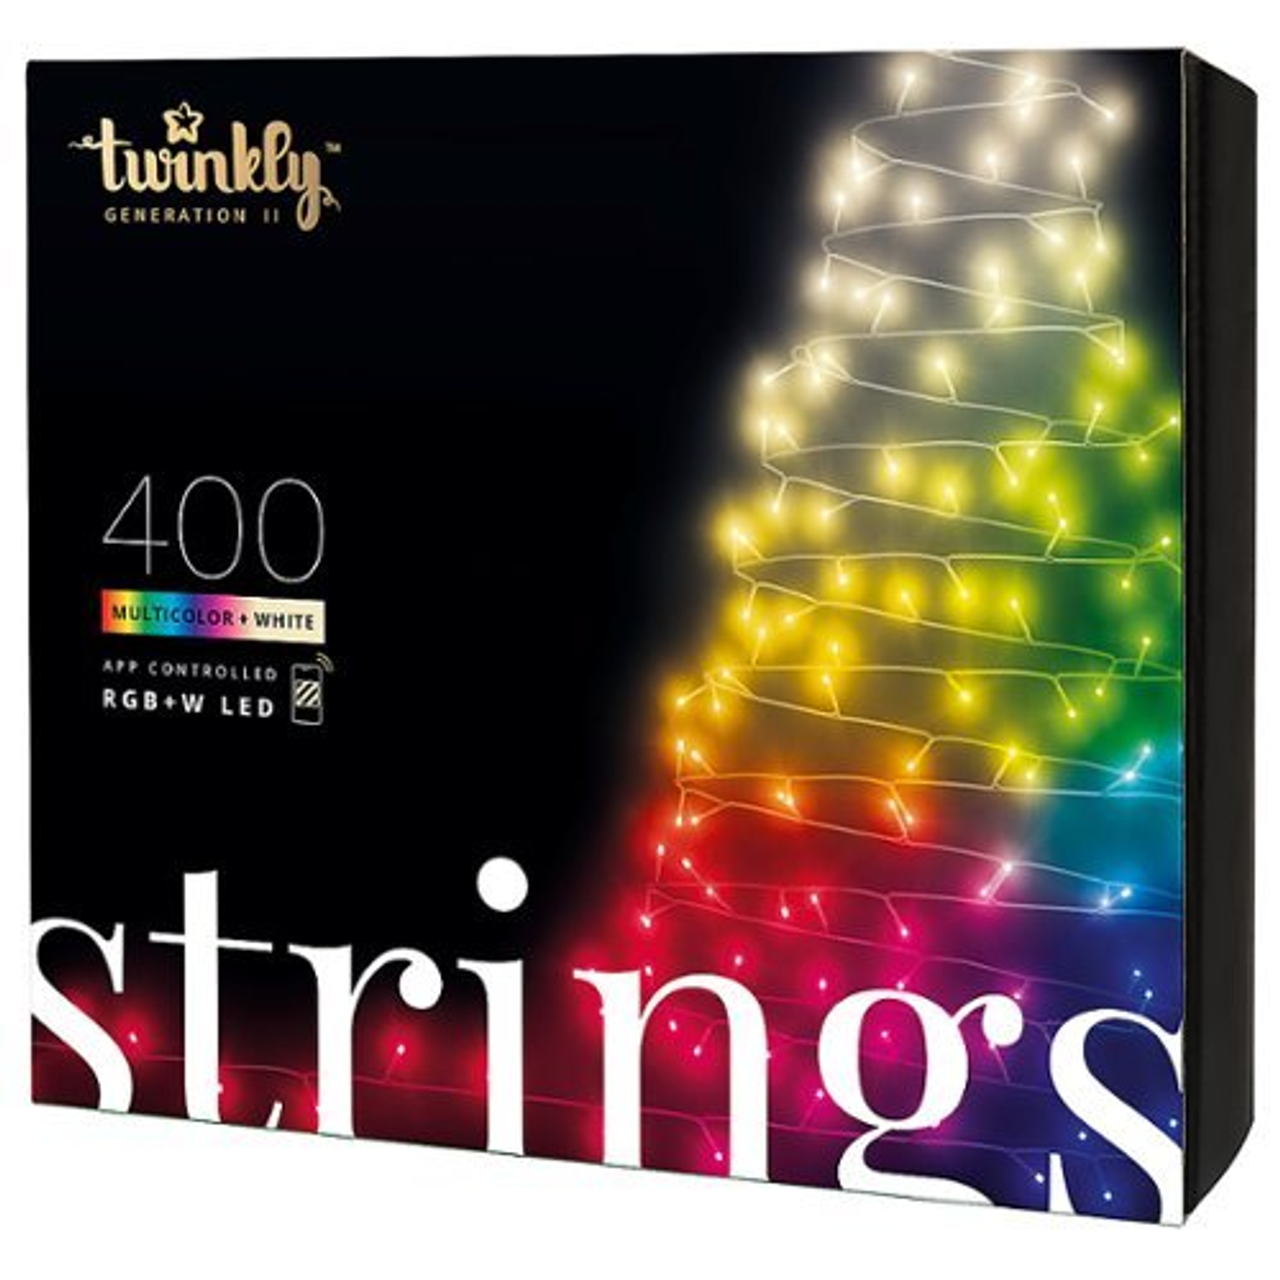 Twinkly - Smart Light Strings Special Edition 400 RGB+W LED Gen II, 105 ft - Soft White